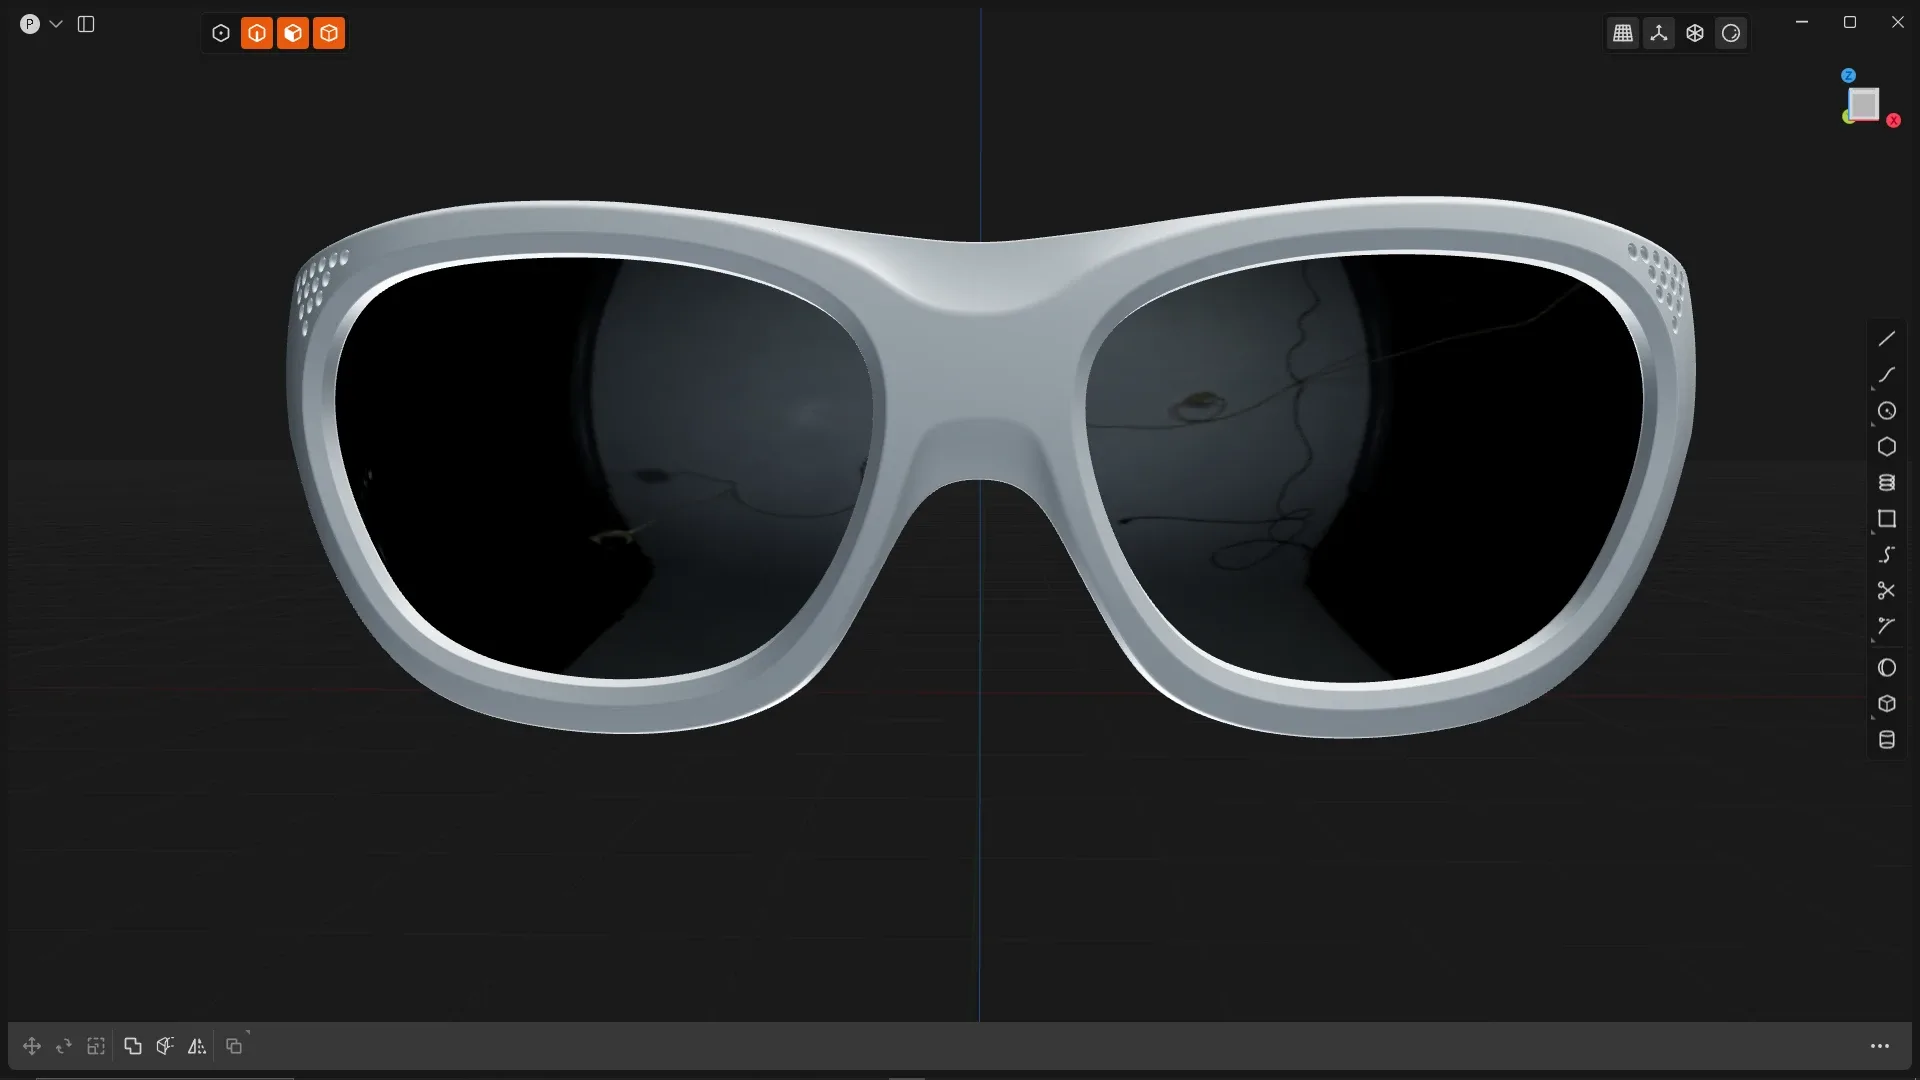 Plasticity 3D Tricky Glasses learn how to shape anything!!